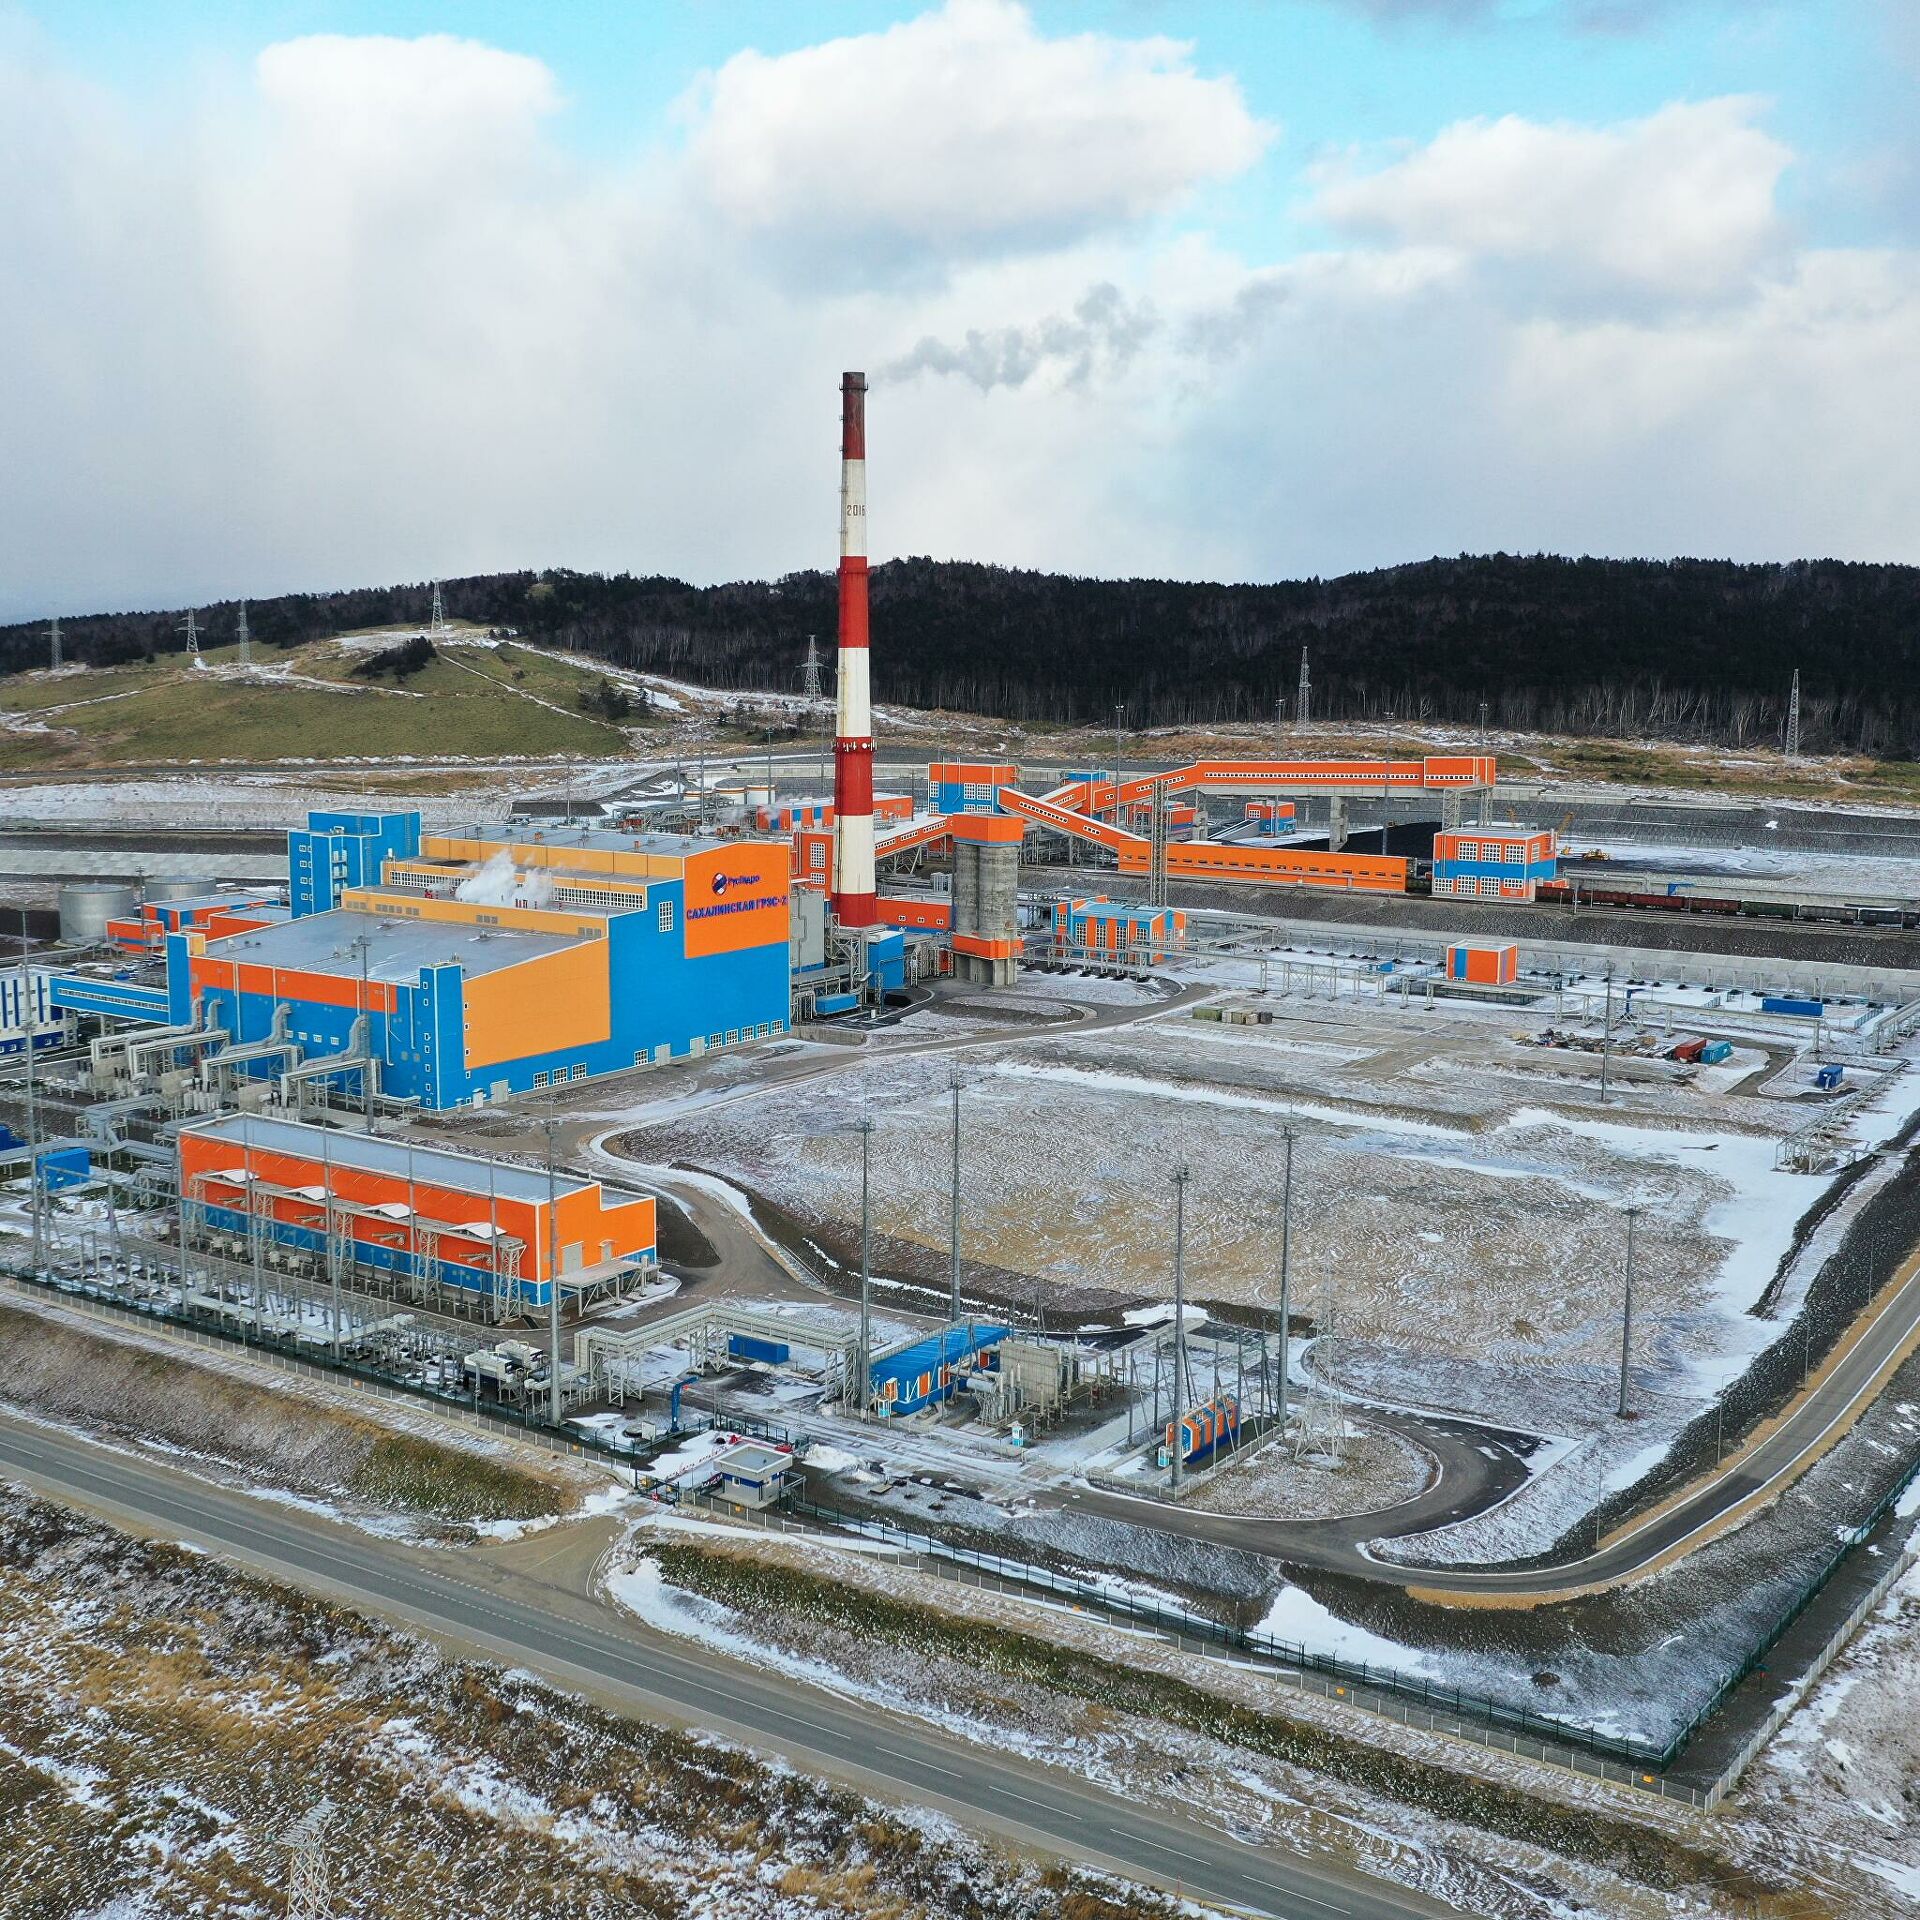 Sakhalin Hydroelectric Power Station-2. Main production complex